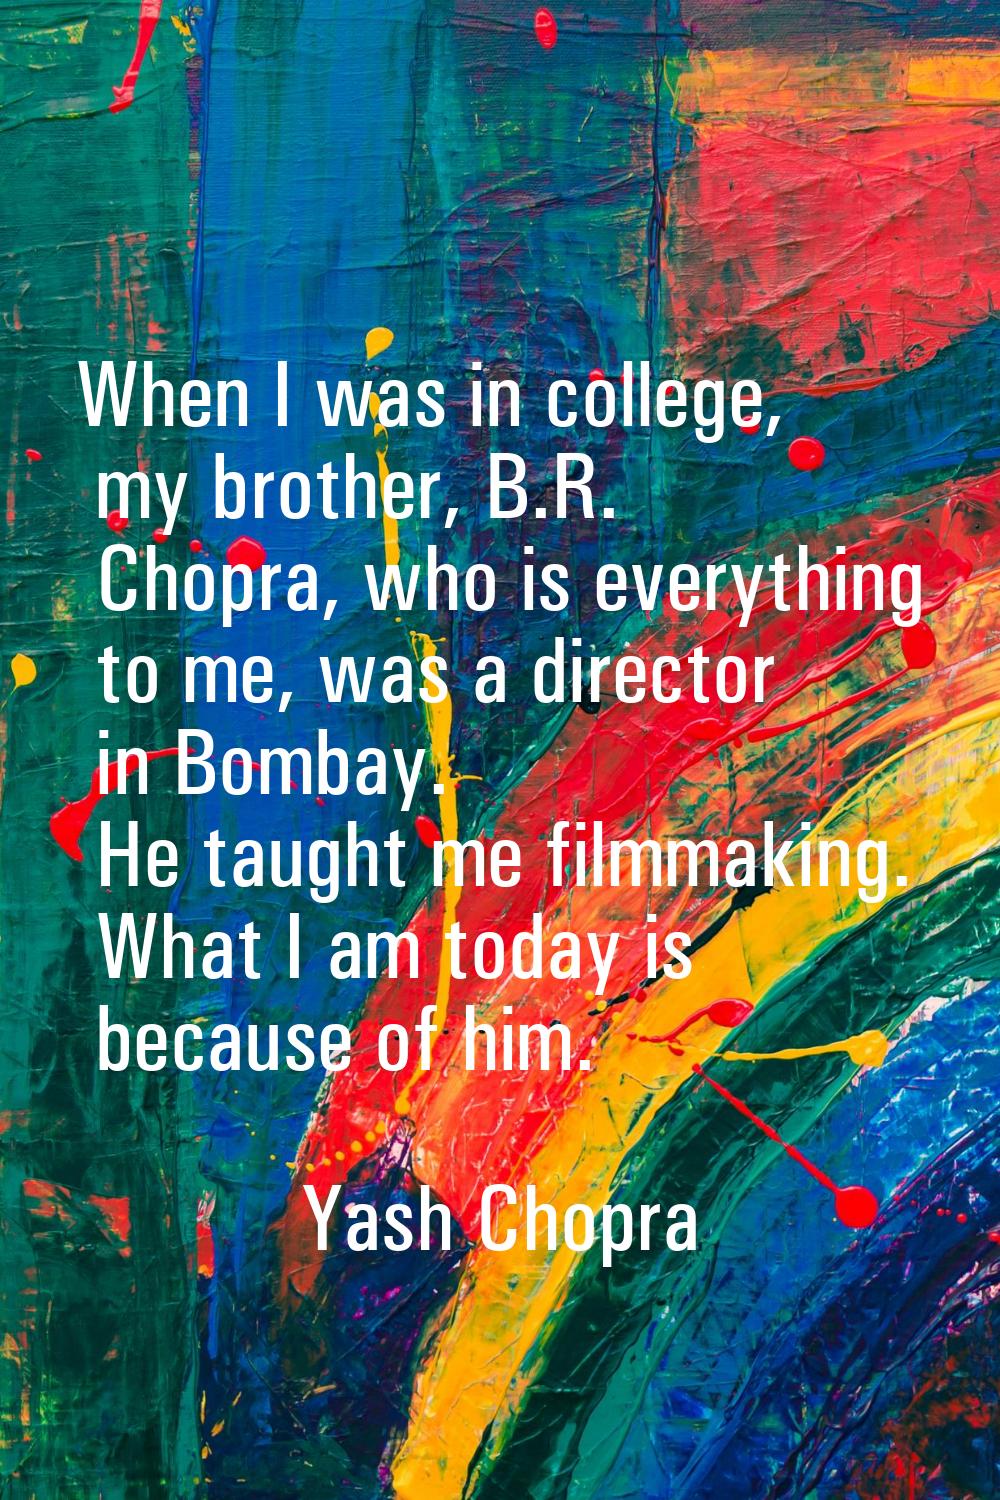 When I was in college, my brother, B.R. Chopra, who is everything to me, was a director in Bombay. 